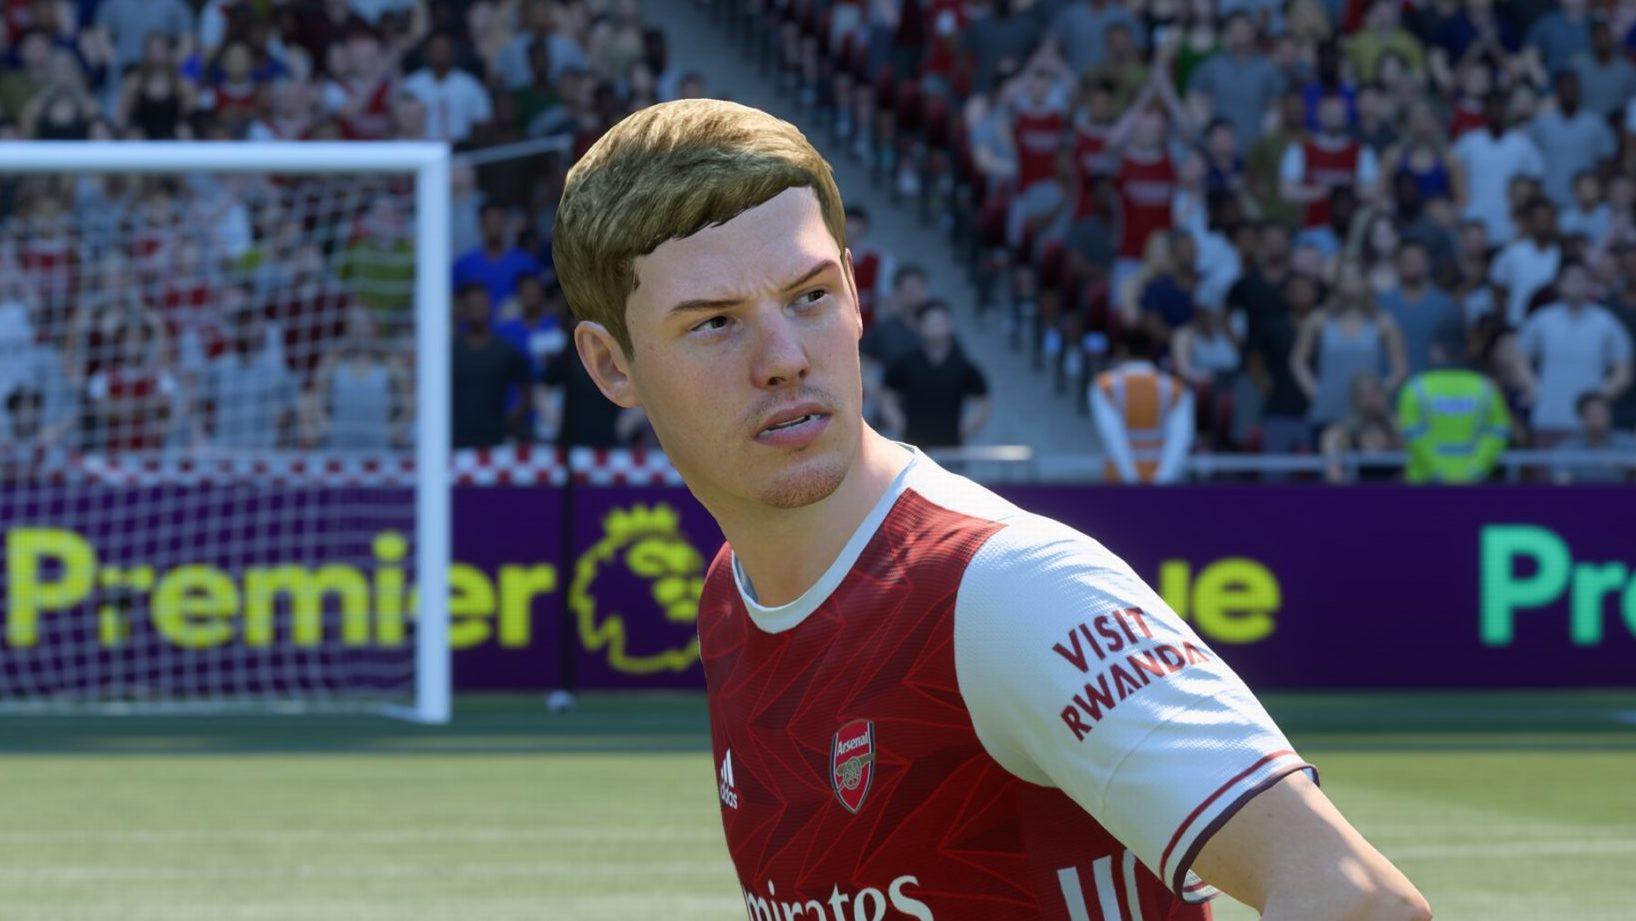 Arsenals Emile Smith Rowe in FIFA 21 Ultimate Team